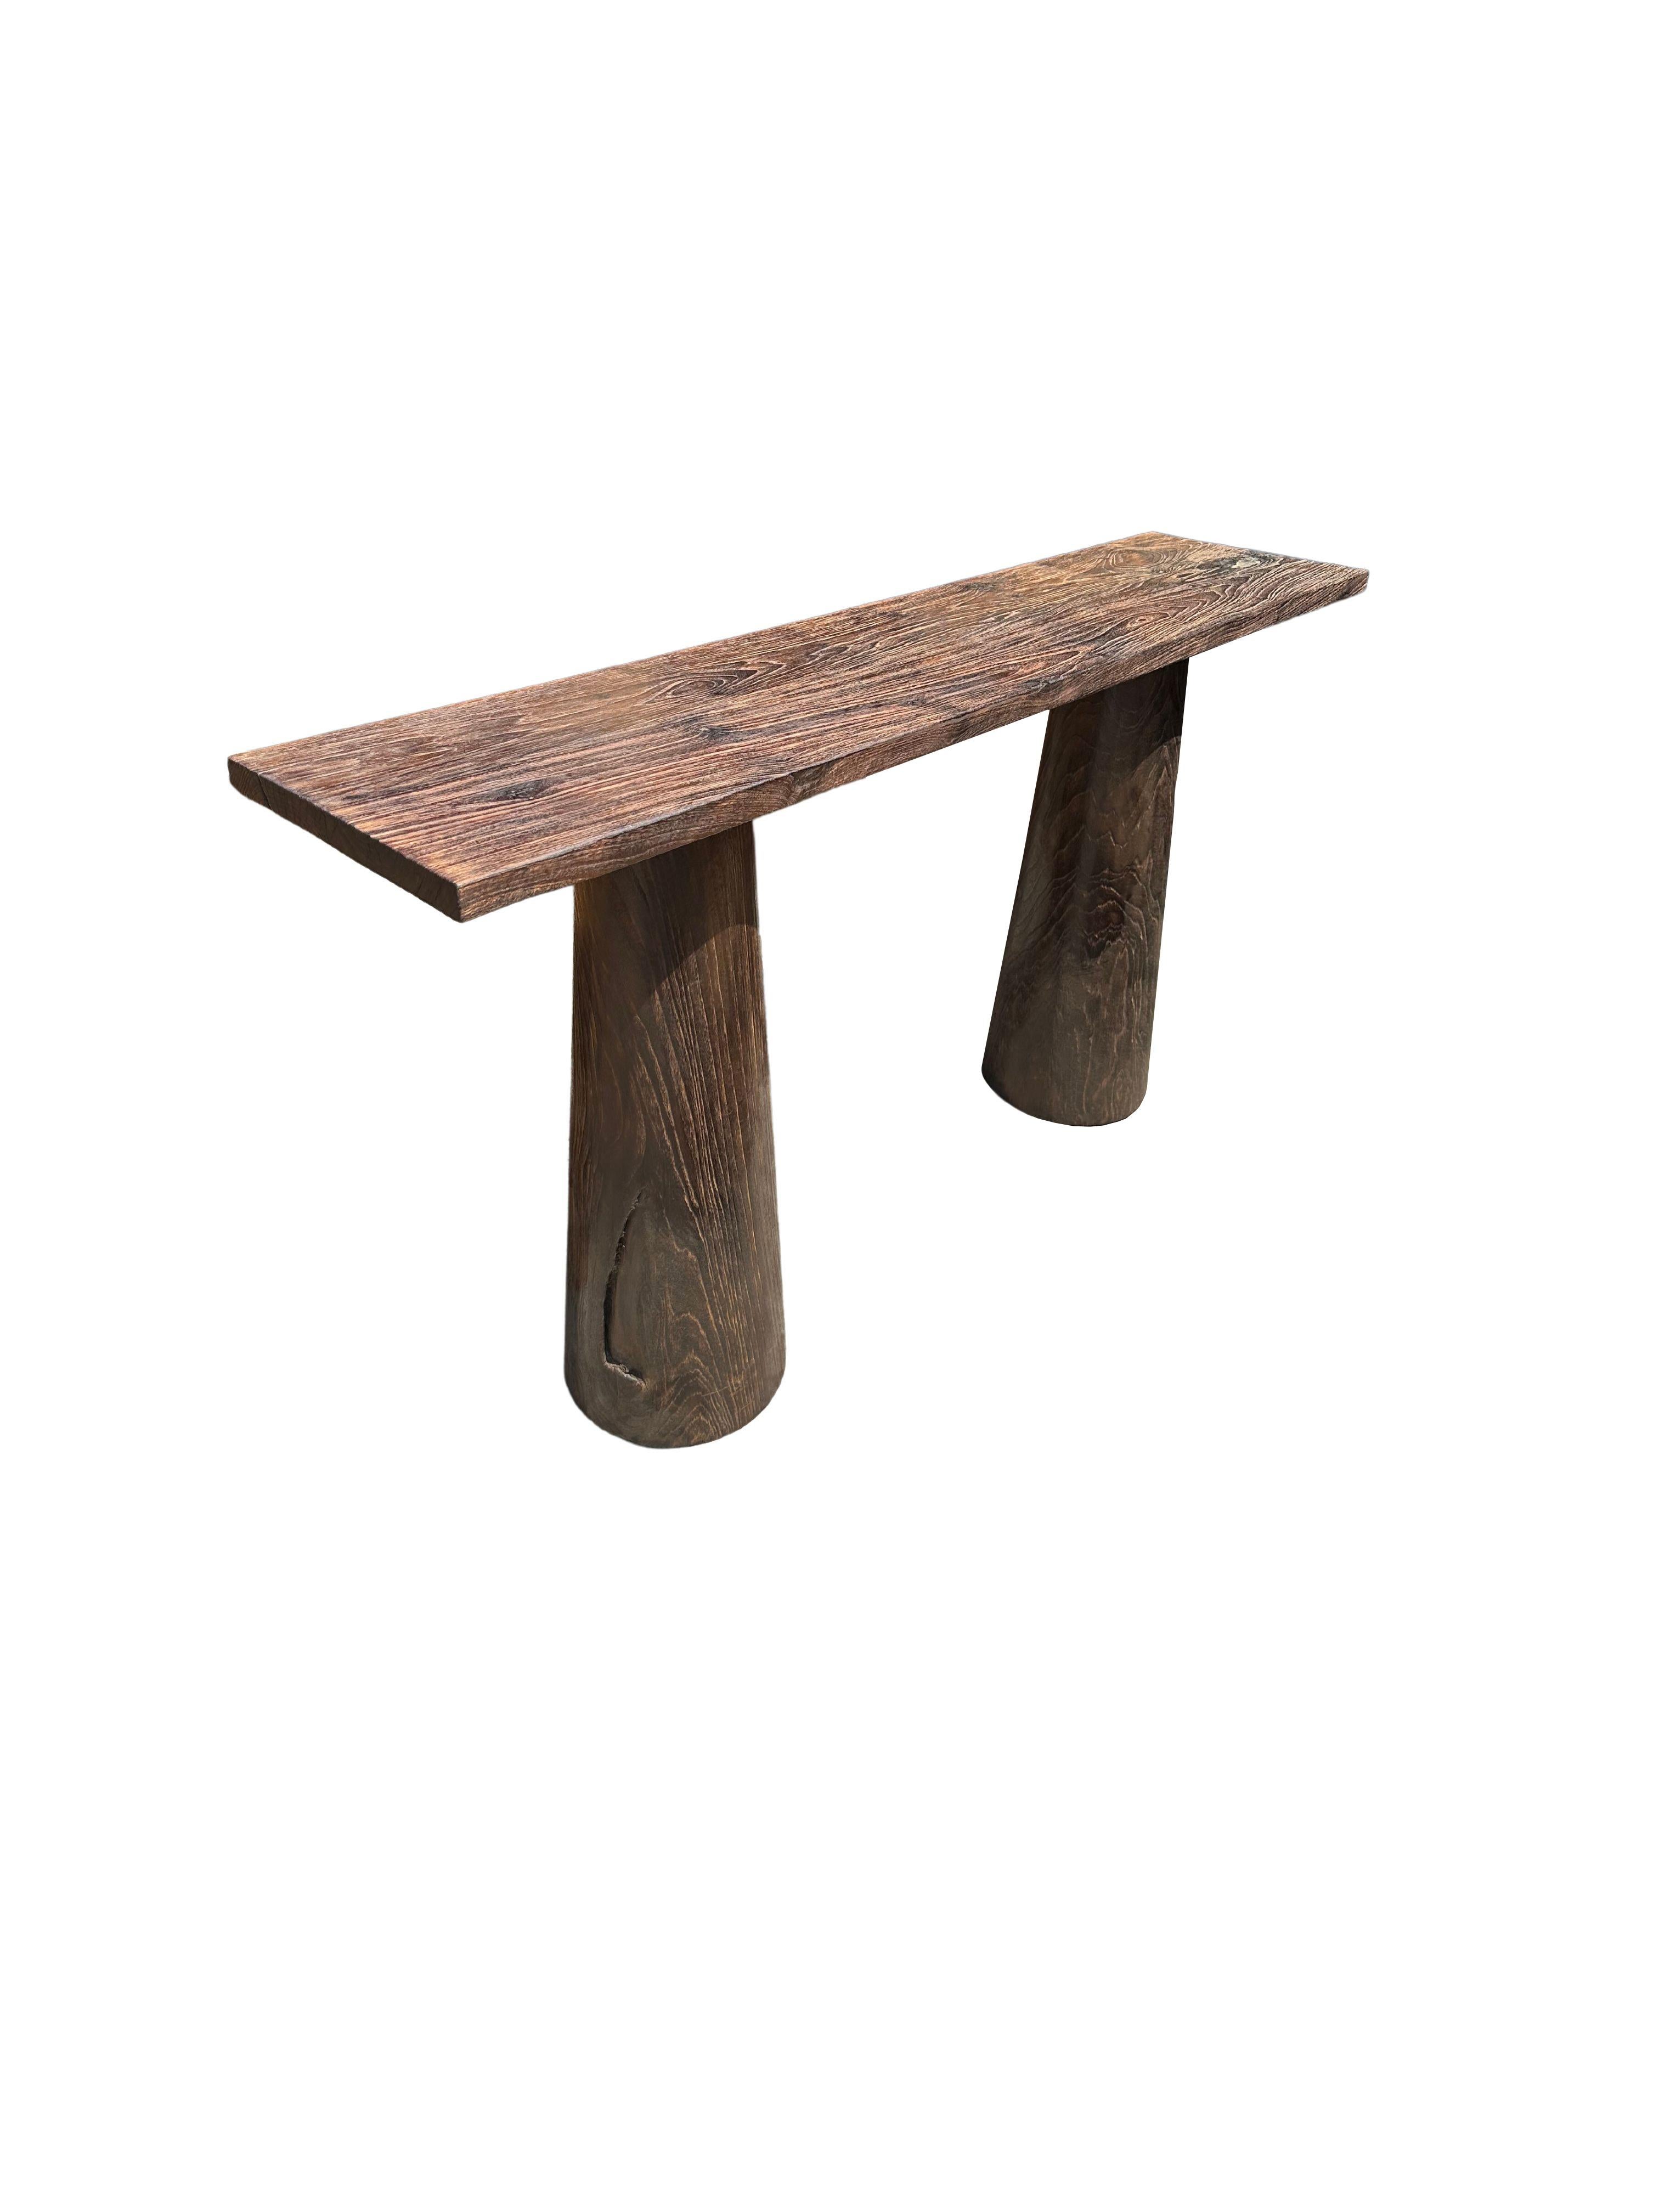 A sculptural teak wood console table crafted from solid teak wood. The table top sits atop two solid,  legs. A wonderfully minimalist object. The subtle wood textures present on all sides adds to its charm. To achieve its unique pigment the wood was